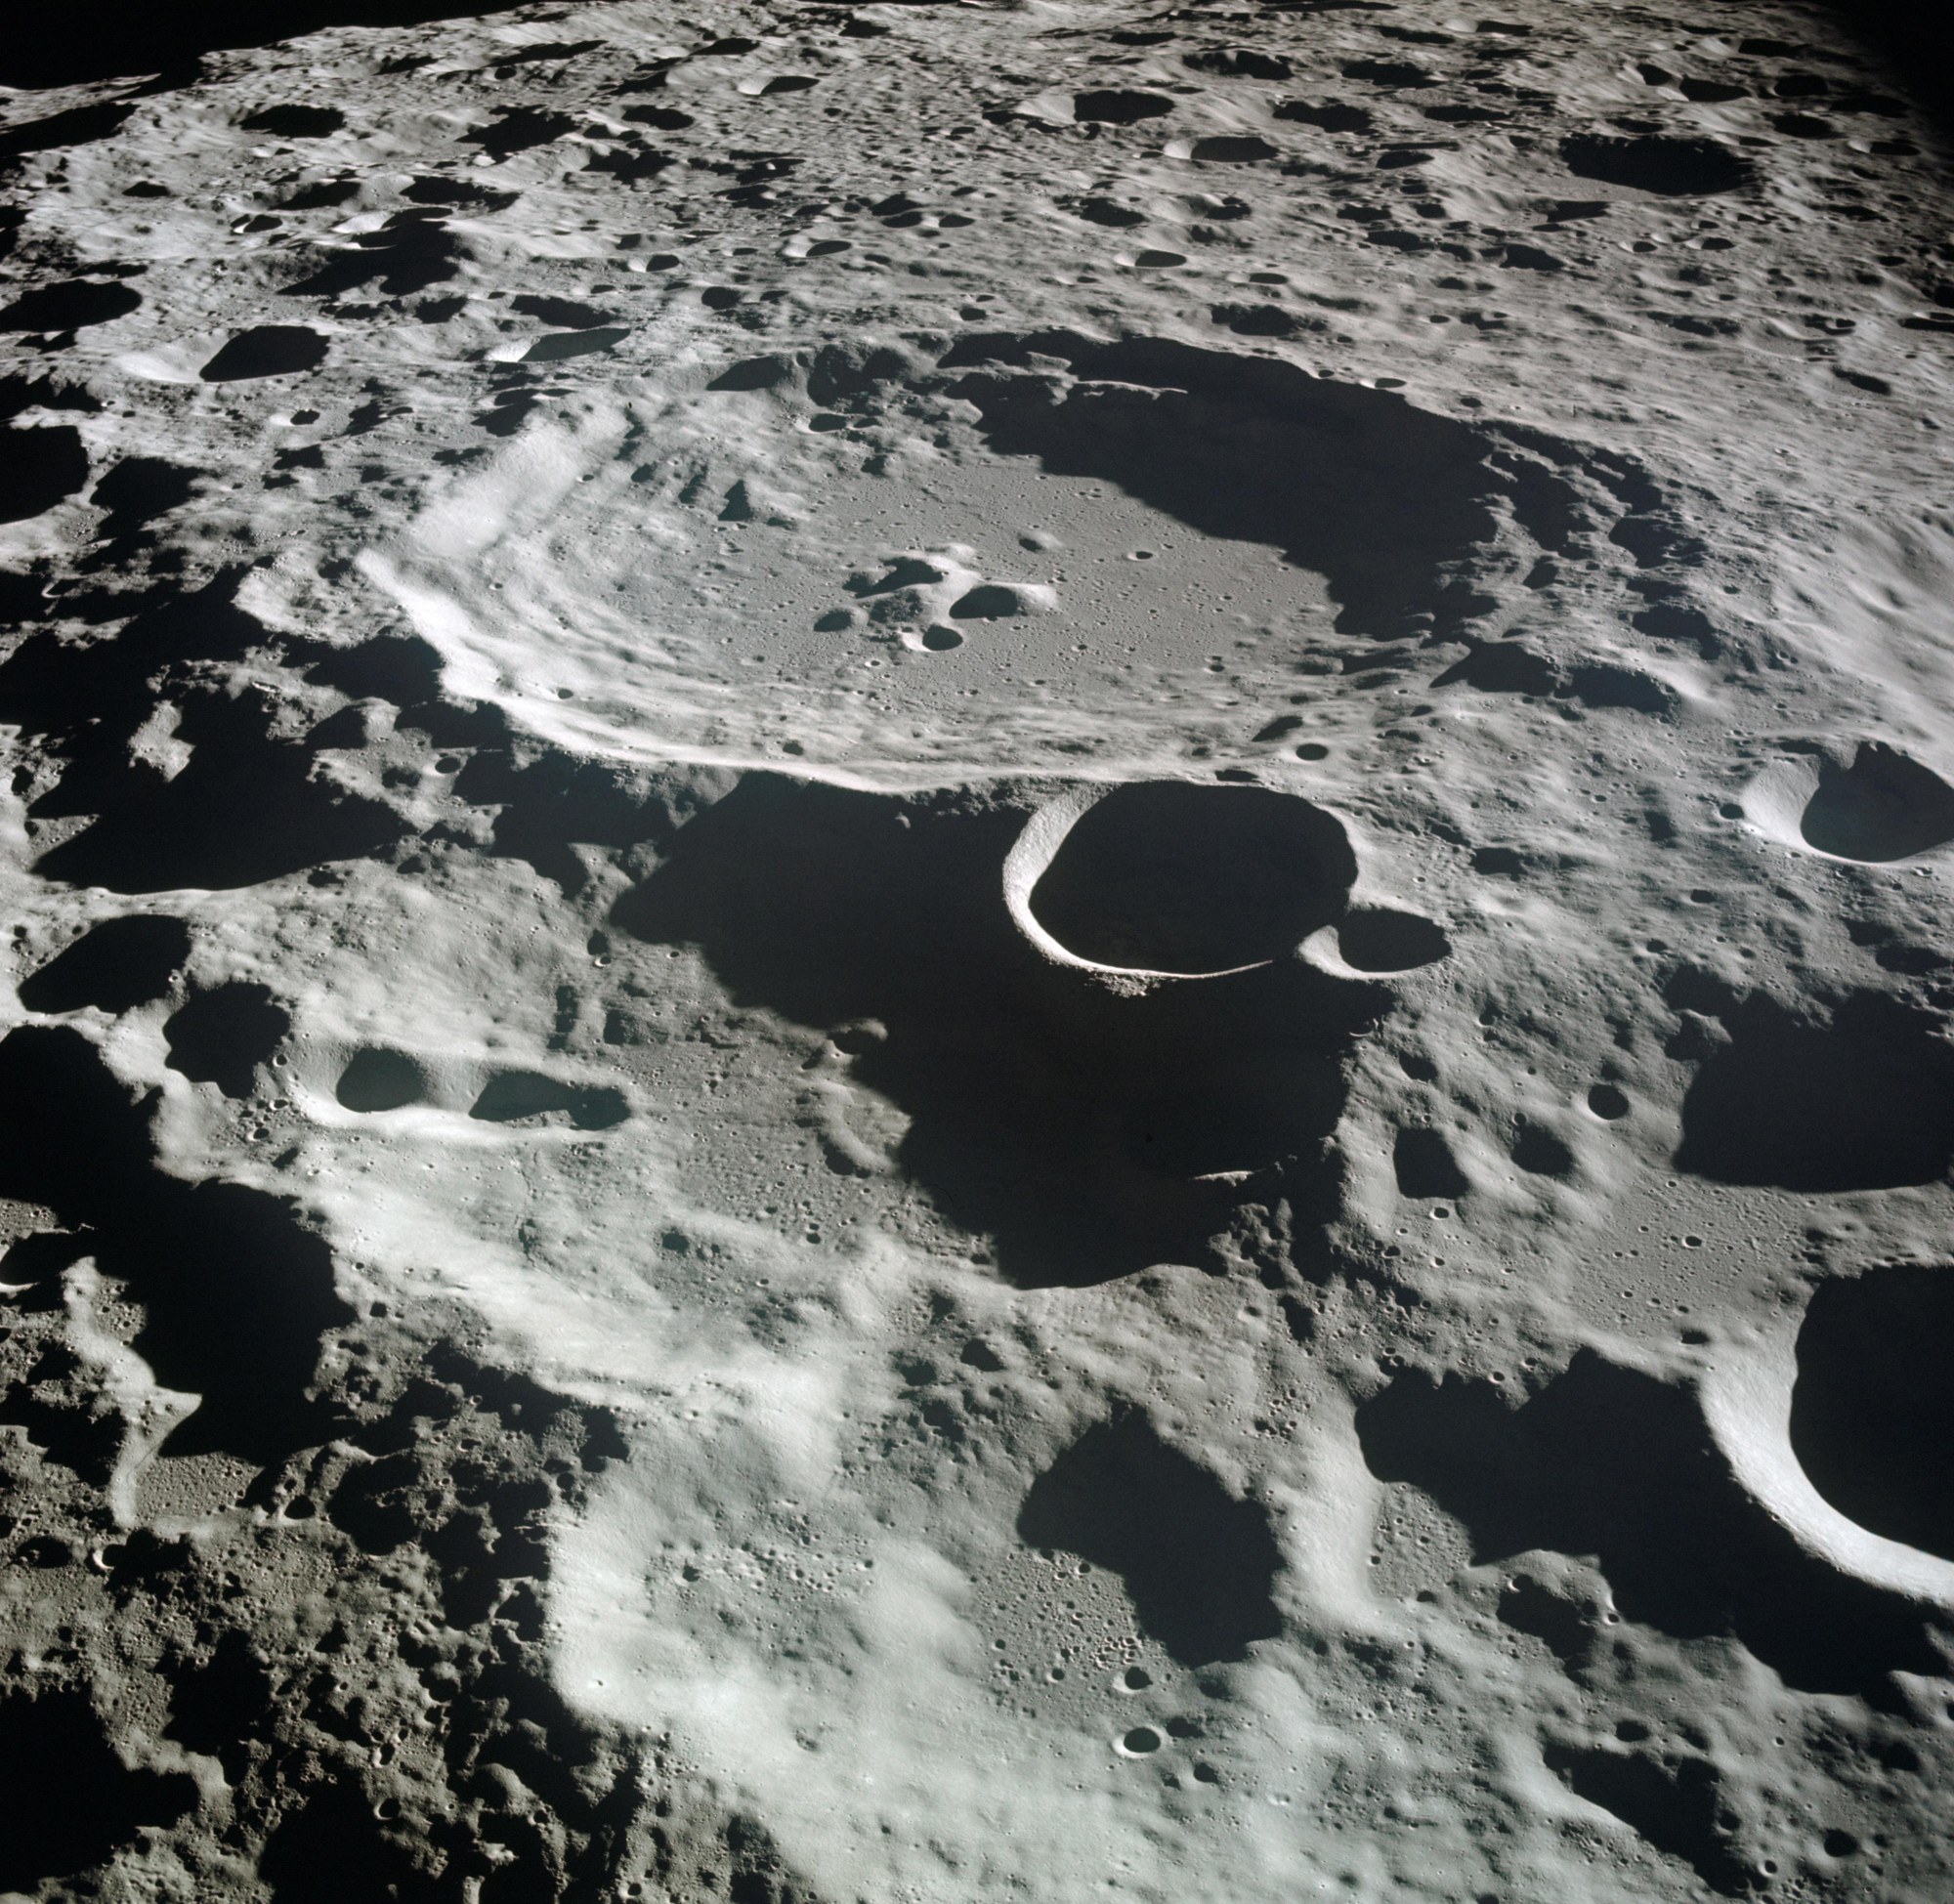 Apollo 11: Crater on the Moon